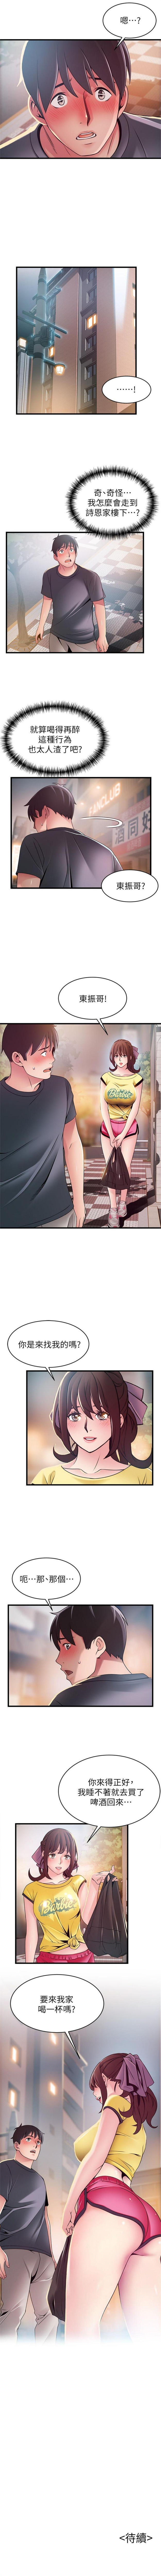 Aunty 弱點 1-94 官方中文（連載中） Blow Jobs - Page 604